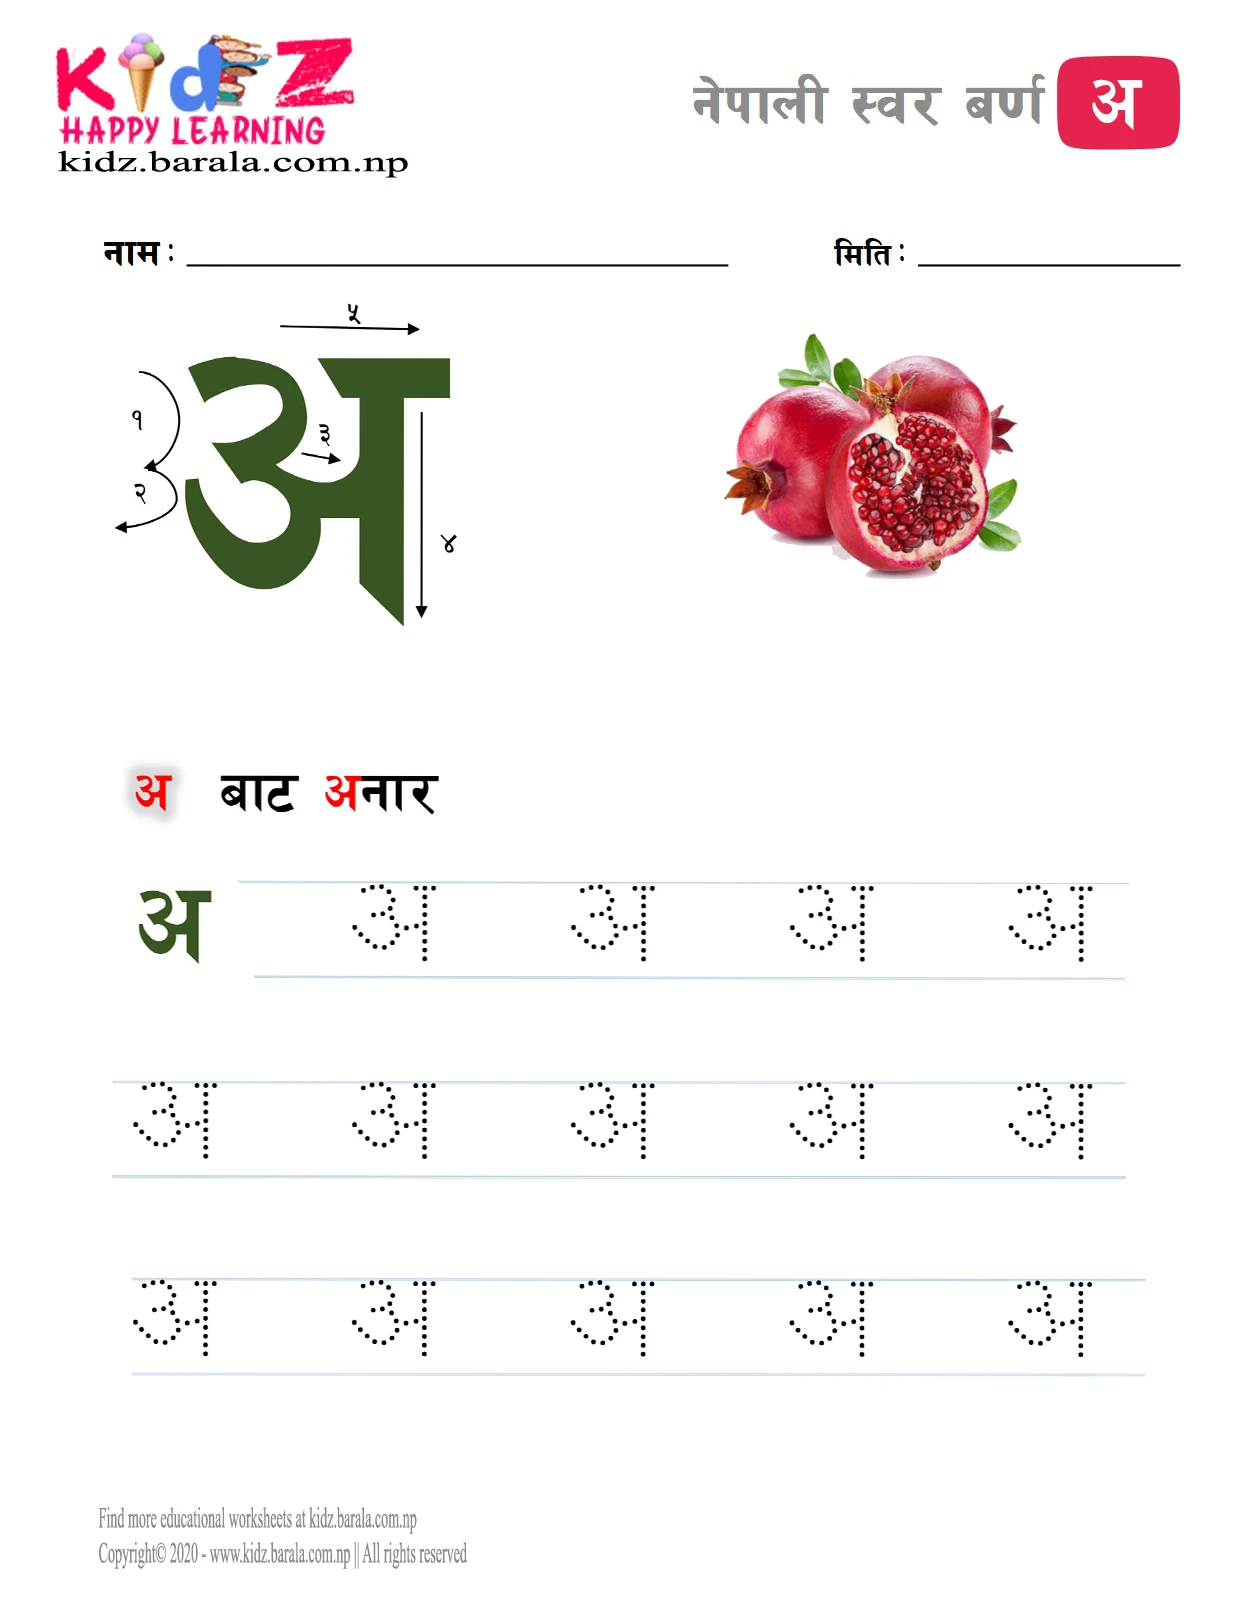 Nepali Vowel letter A अ tracing worksheet free download .pdf